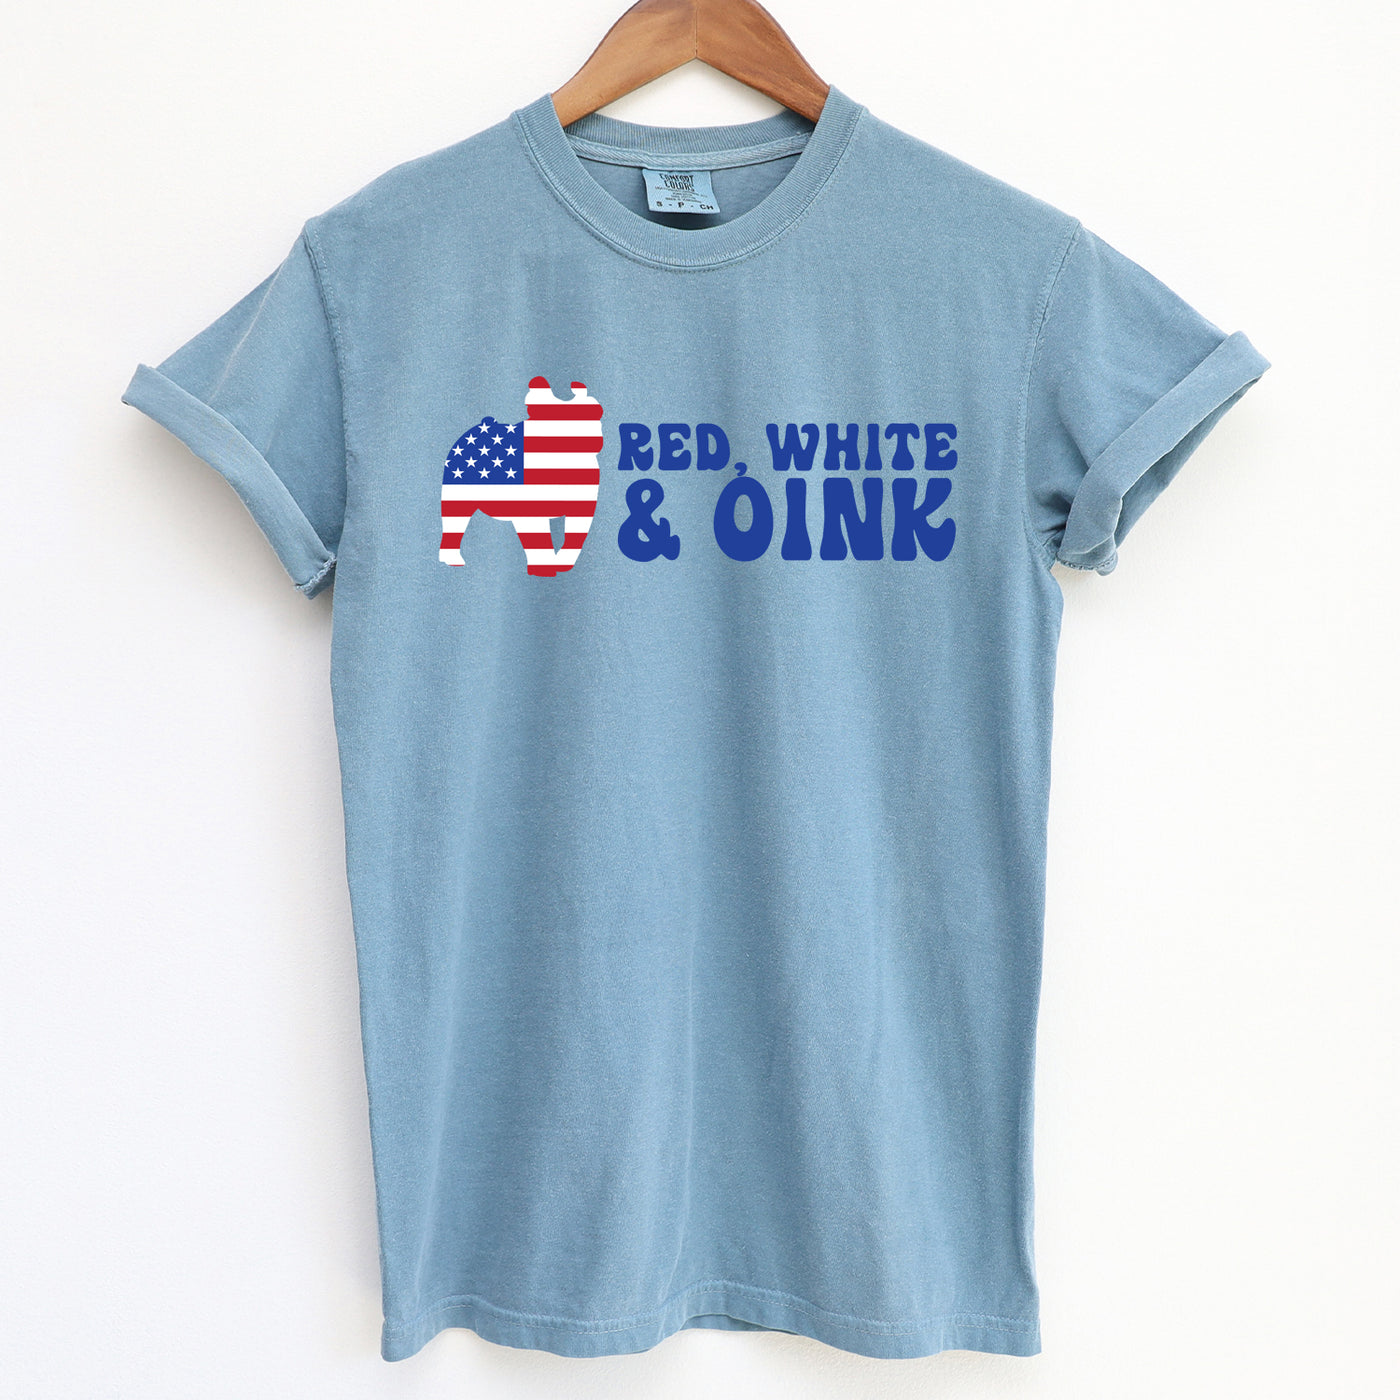 Red, White & Oink ComfortWash/ComfortColor T-Shirt (S-4XL) - Multiple Colors!